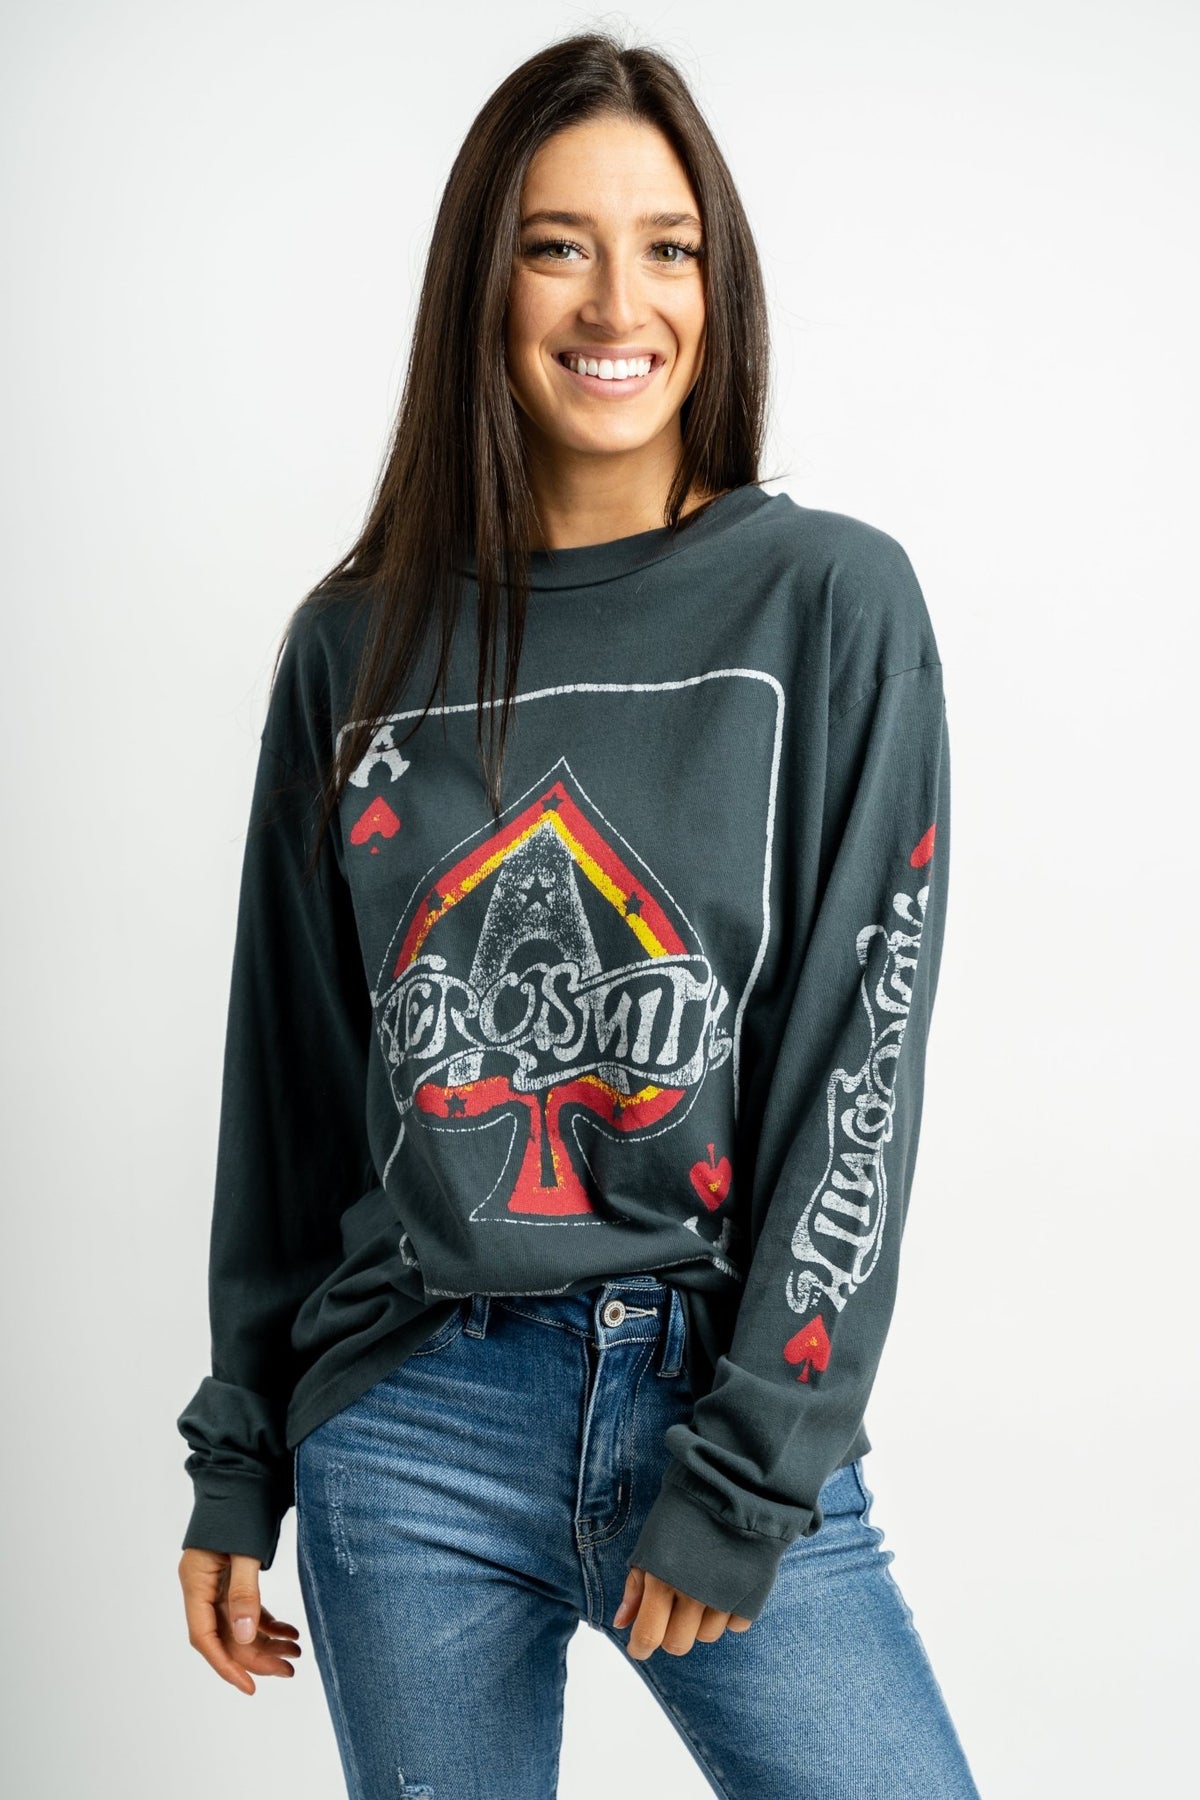 DayDreamer Aerosmith ace of spade long sleeve tee vintage black - DayDreamer Graphic Band Tees at Lush Fashion Lounge Trendy Boutique in Oklahoma City